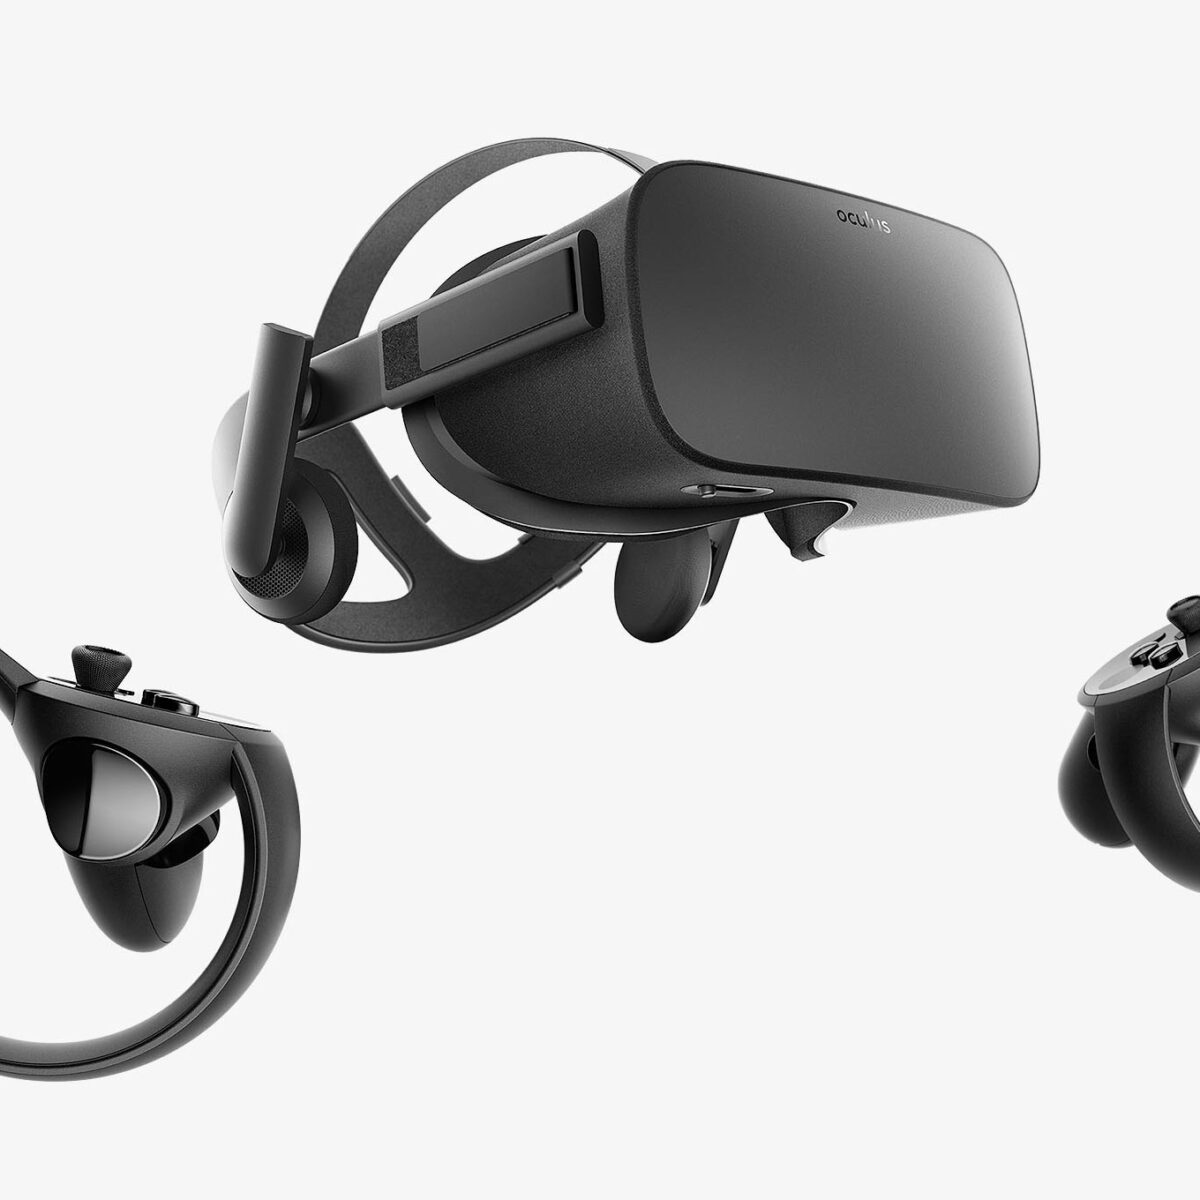 chimney the mall Mechanic Oculus Rift Drops Price Again: $399 With Touch Controllers – Sparks  Speculation – Techgage